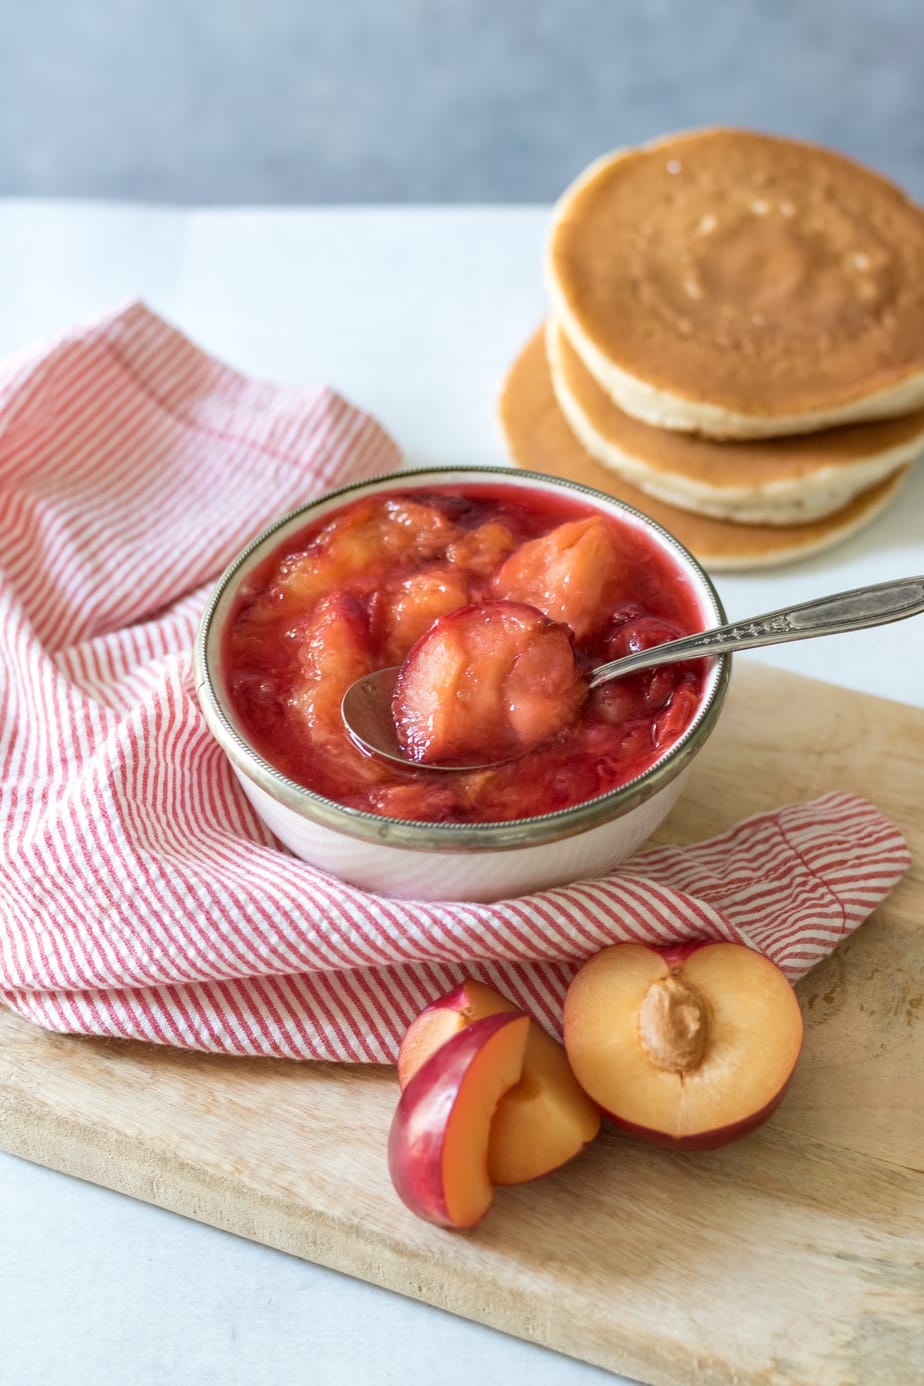 Bowl of plum compote next to pancakes.